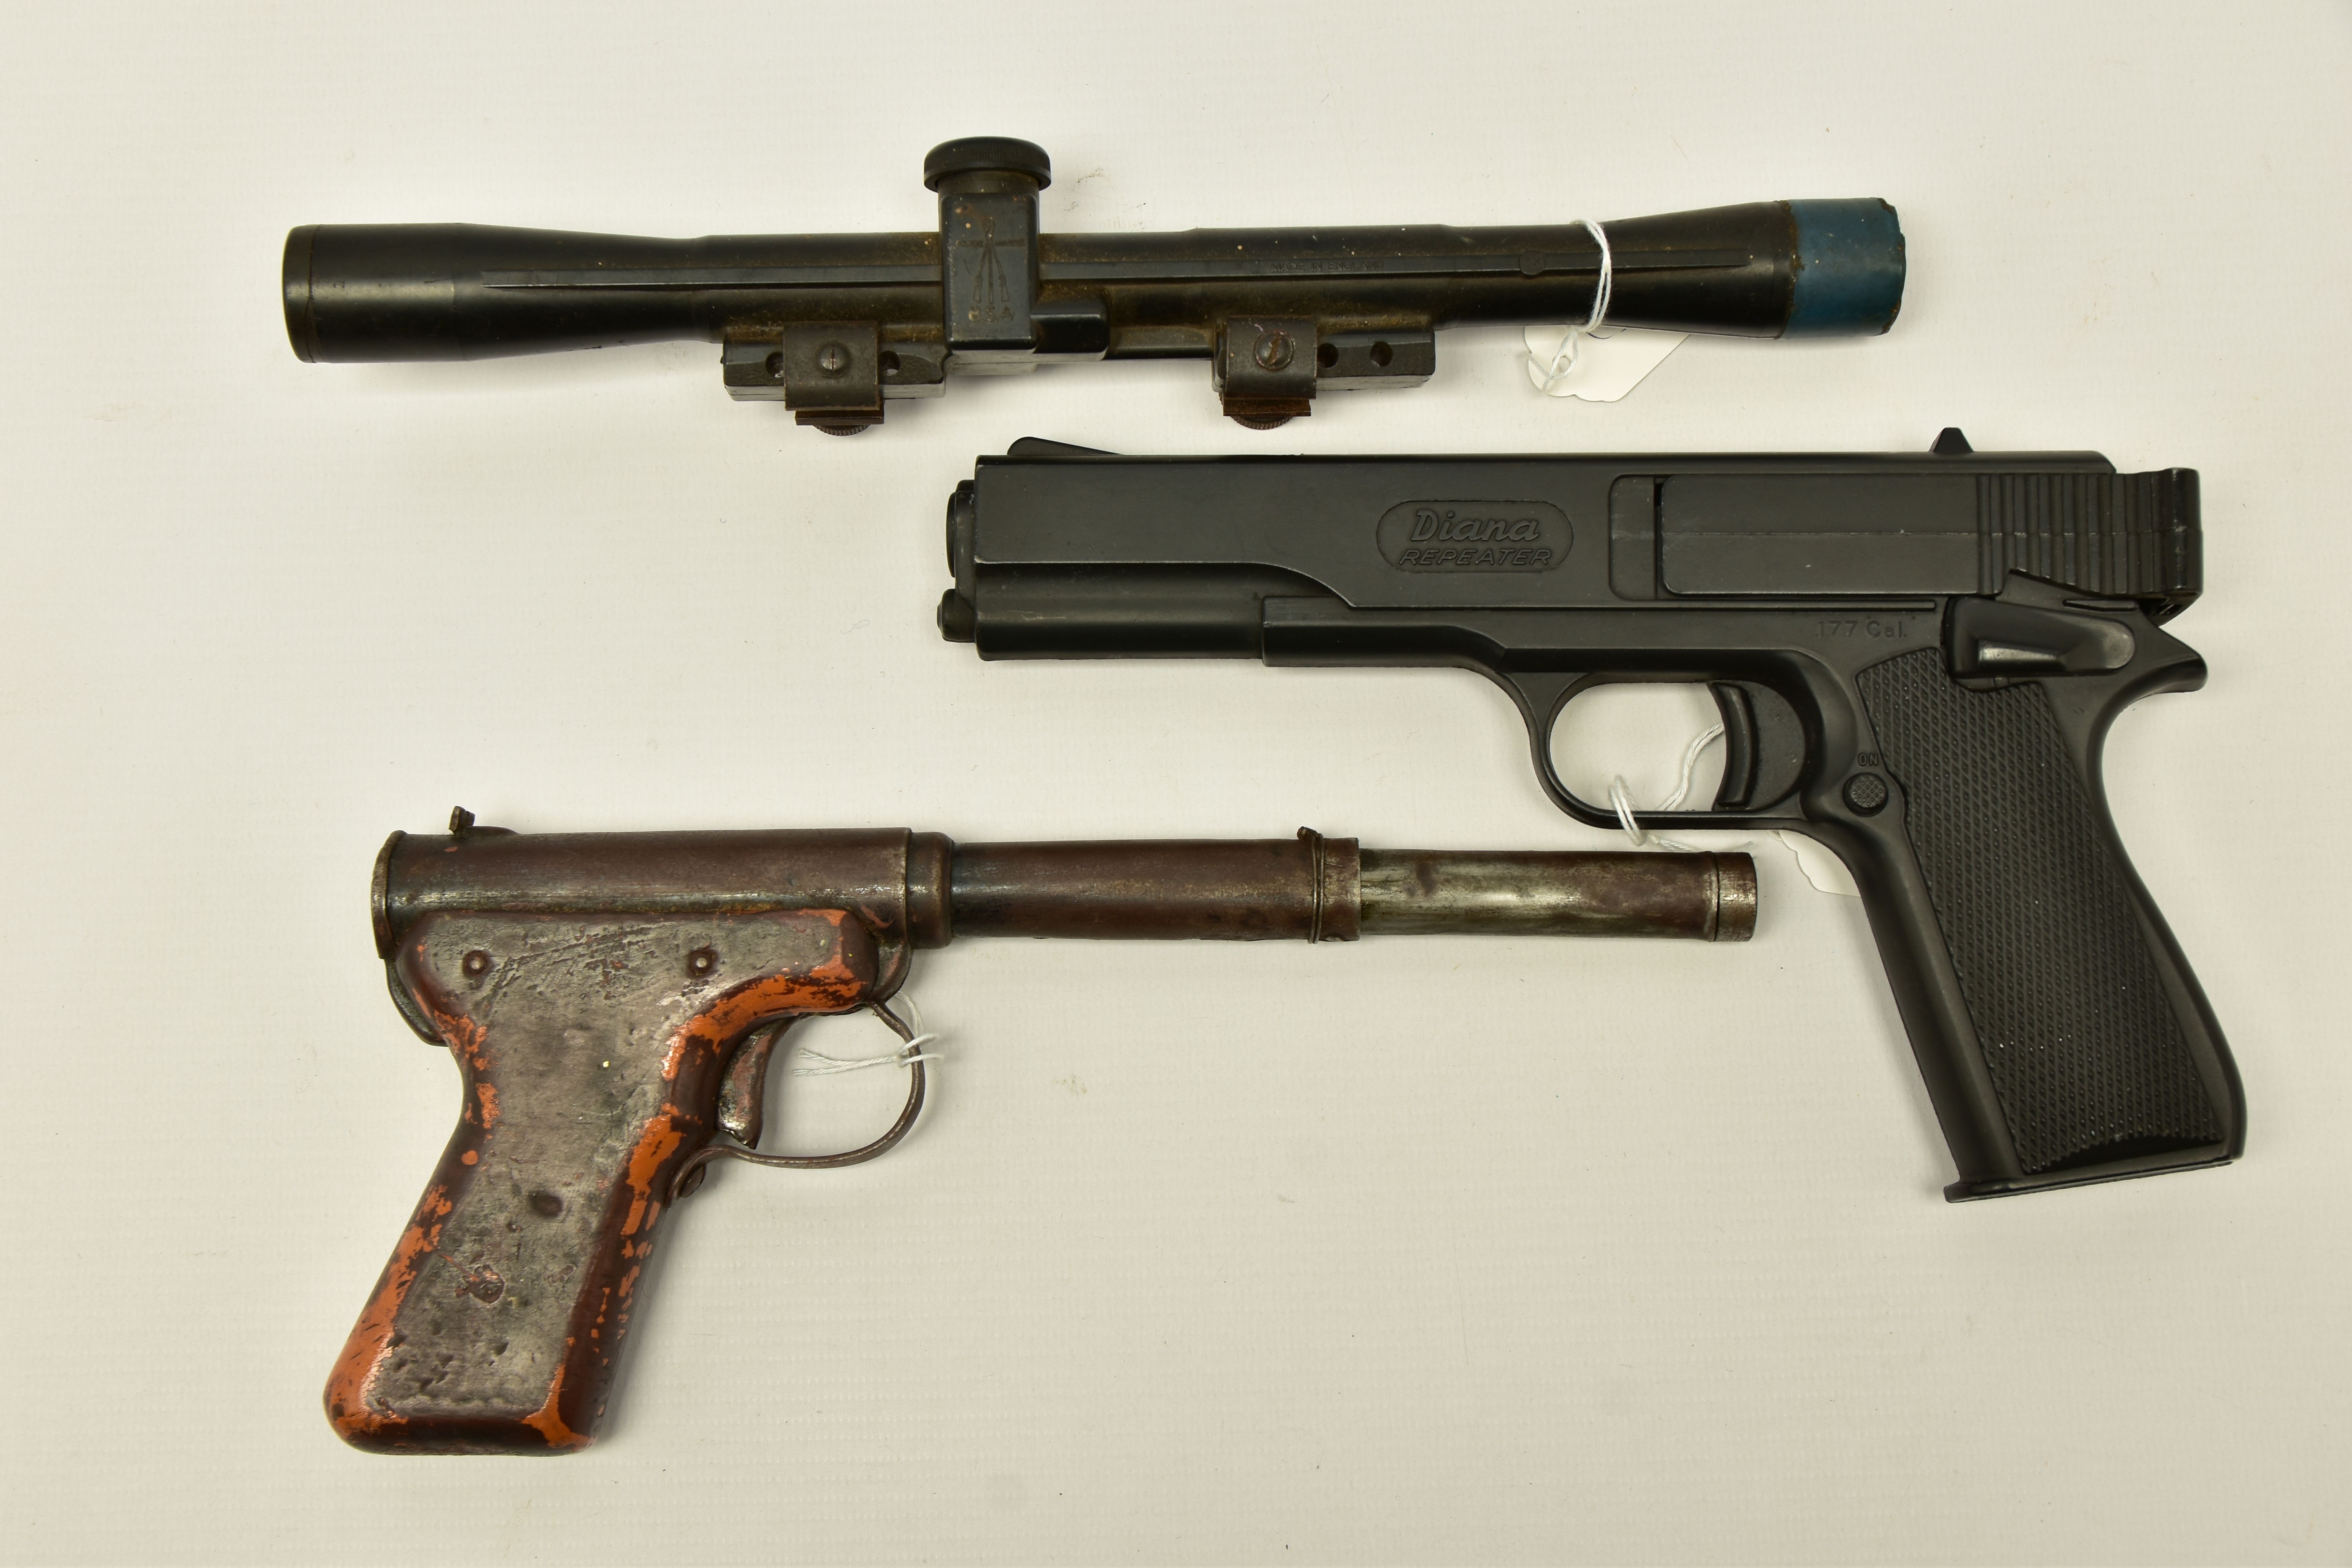 A B.S.A. CADET MAJOR AIR RIFLE, serial number CC27991, heavy rusted overall and fails to engage sear